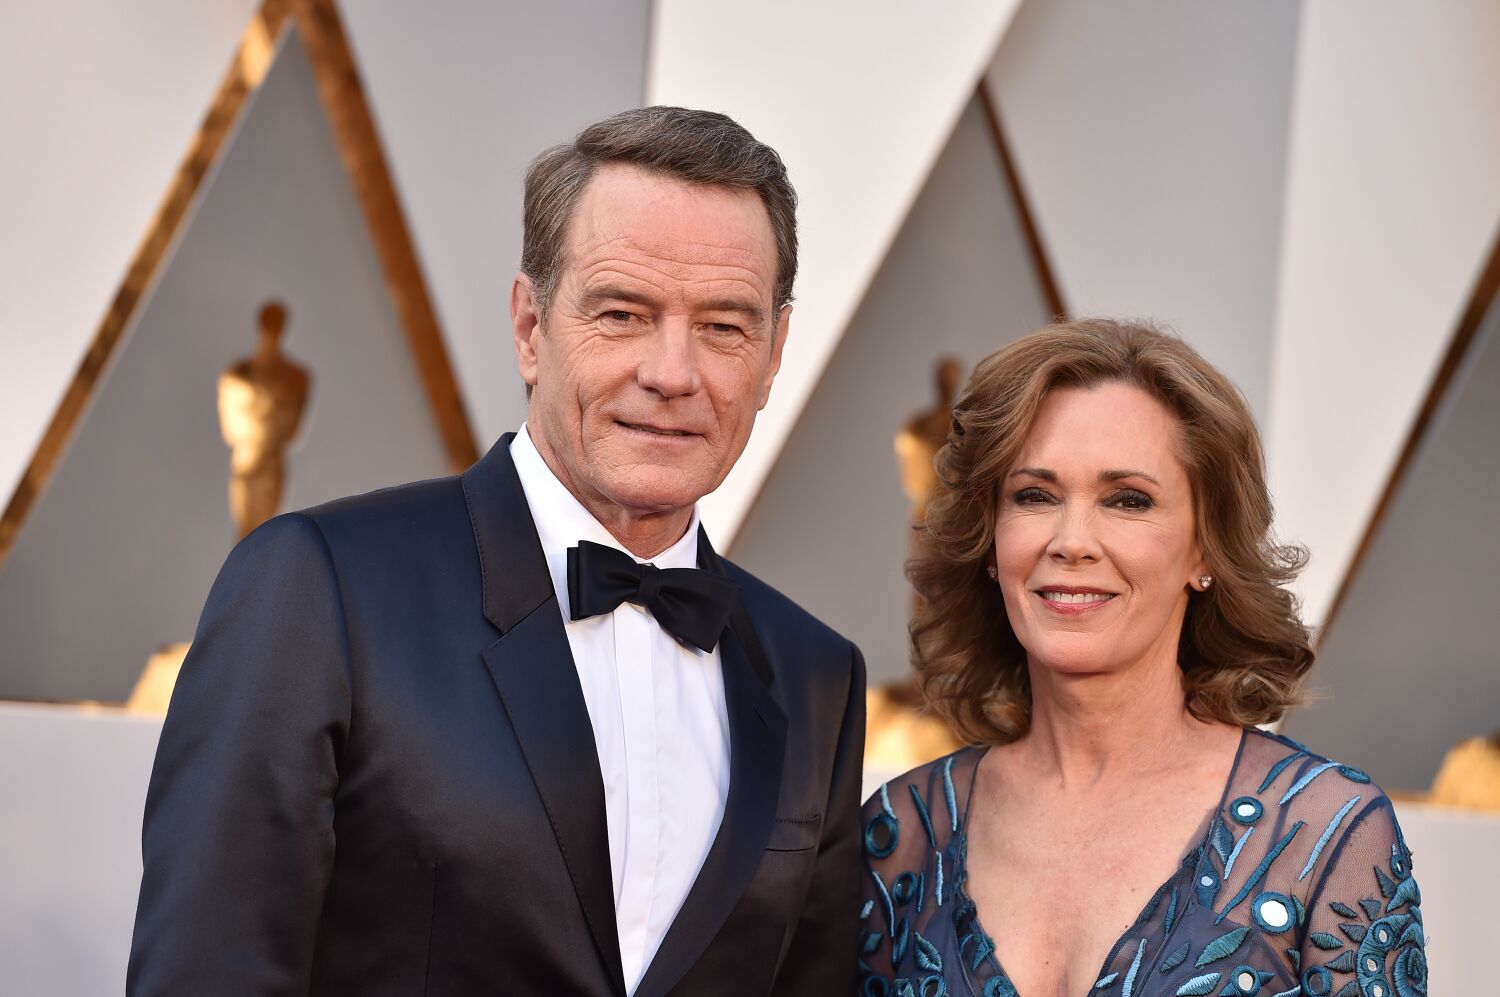 Bryan Cranston is retiring from acting in 2026 for wife Robin Dearden. ‘She deserves it’